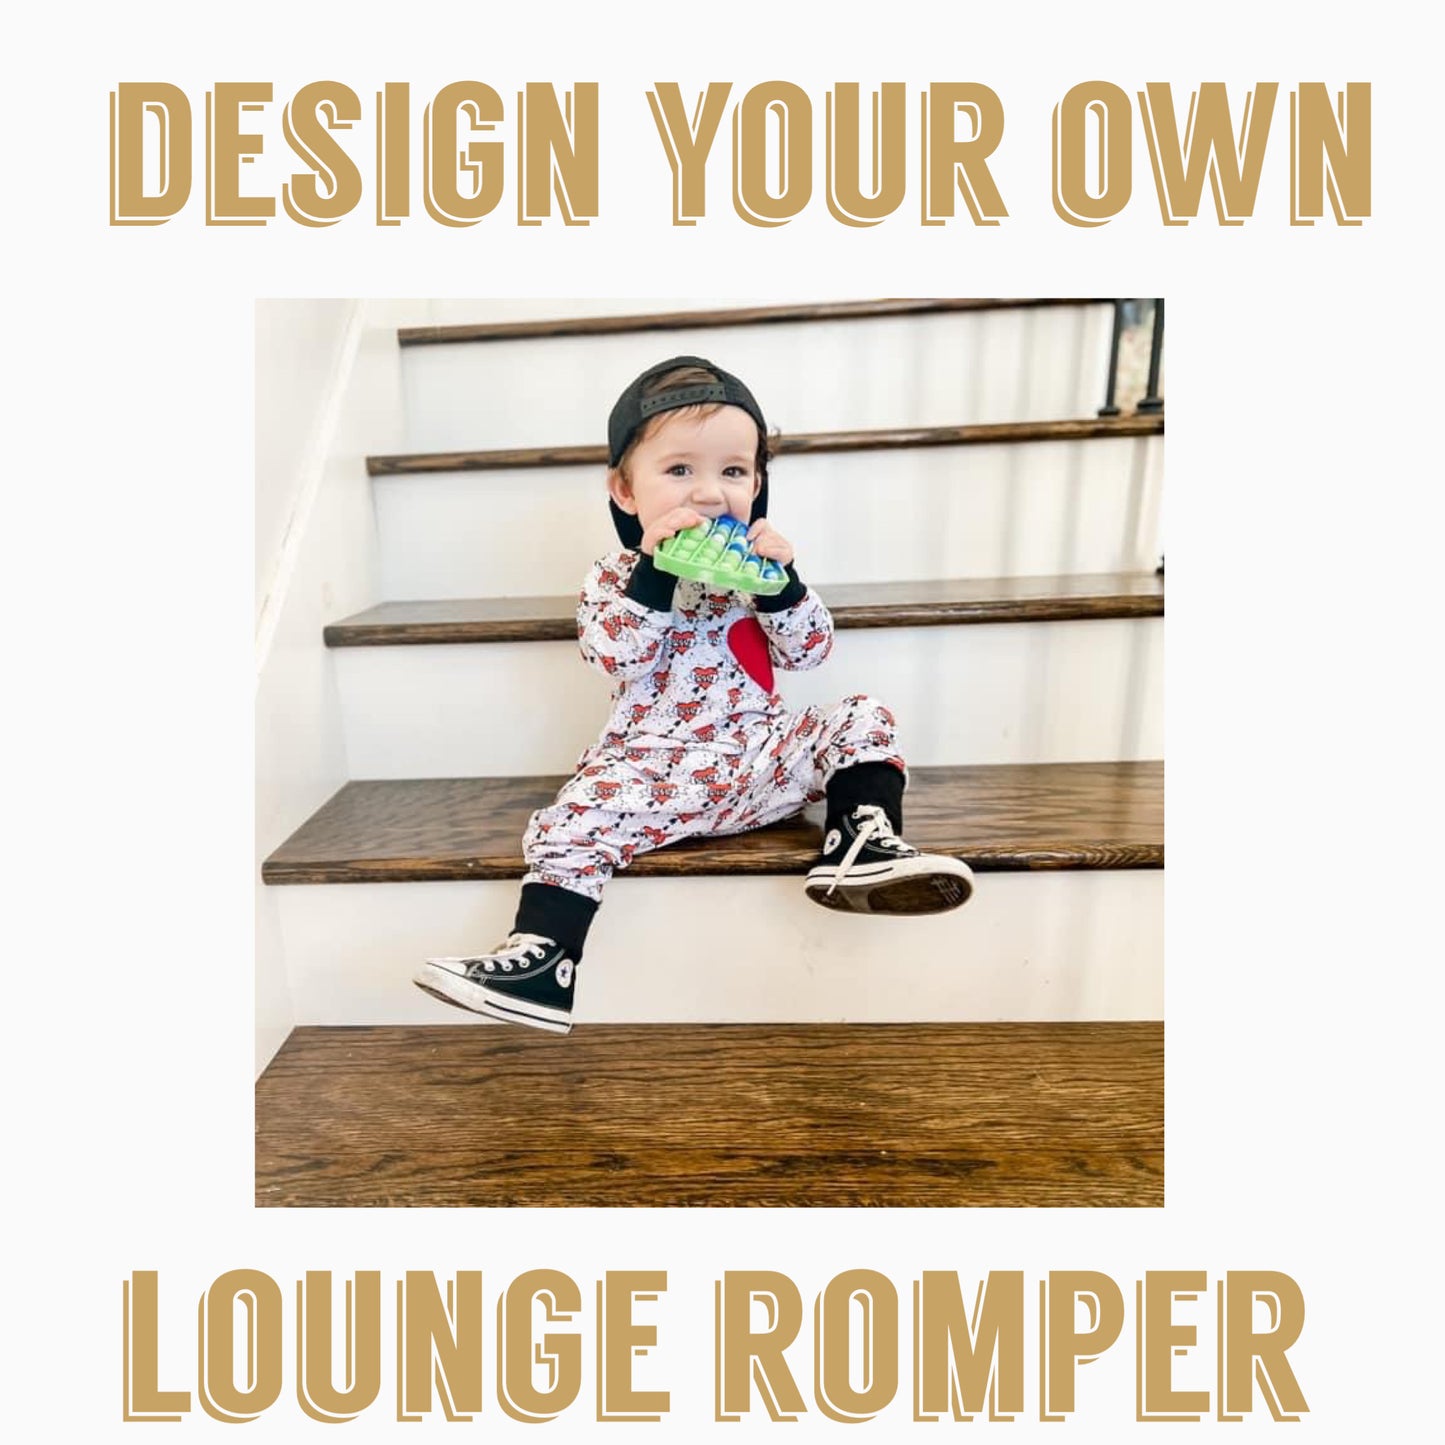 Design Your Own | Lounge Romper